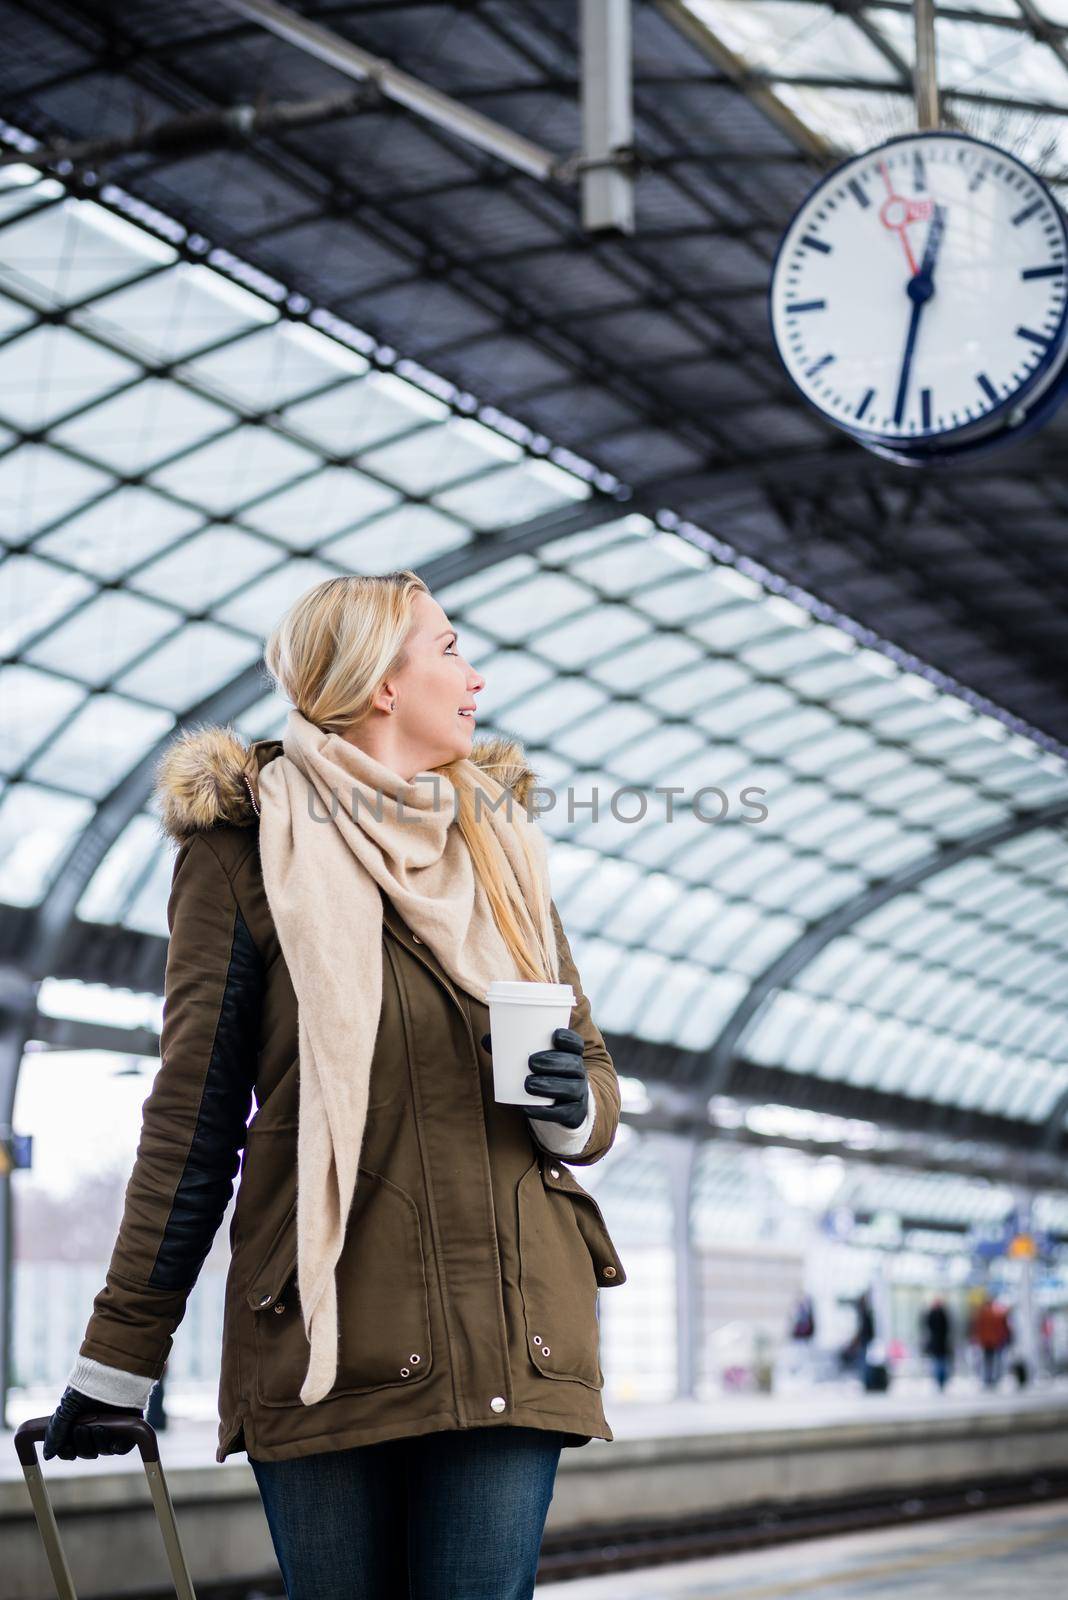 Woman looking impassionate at clock in train station as her train has a delay